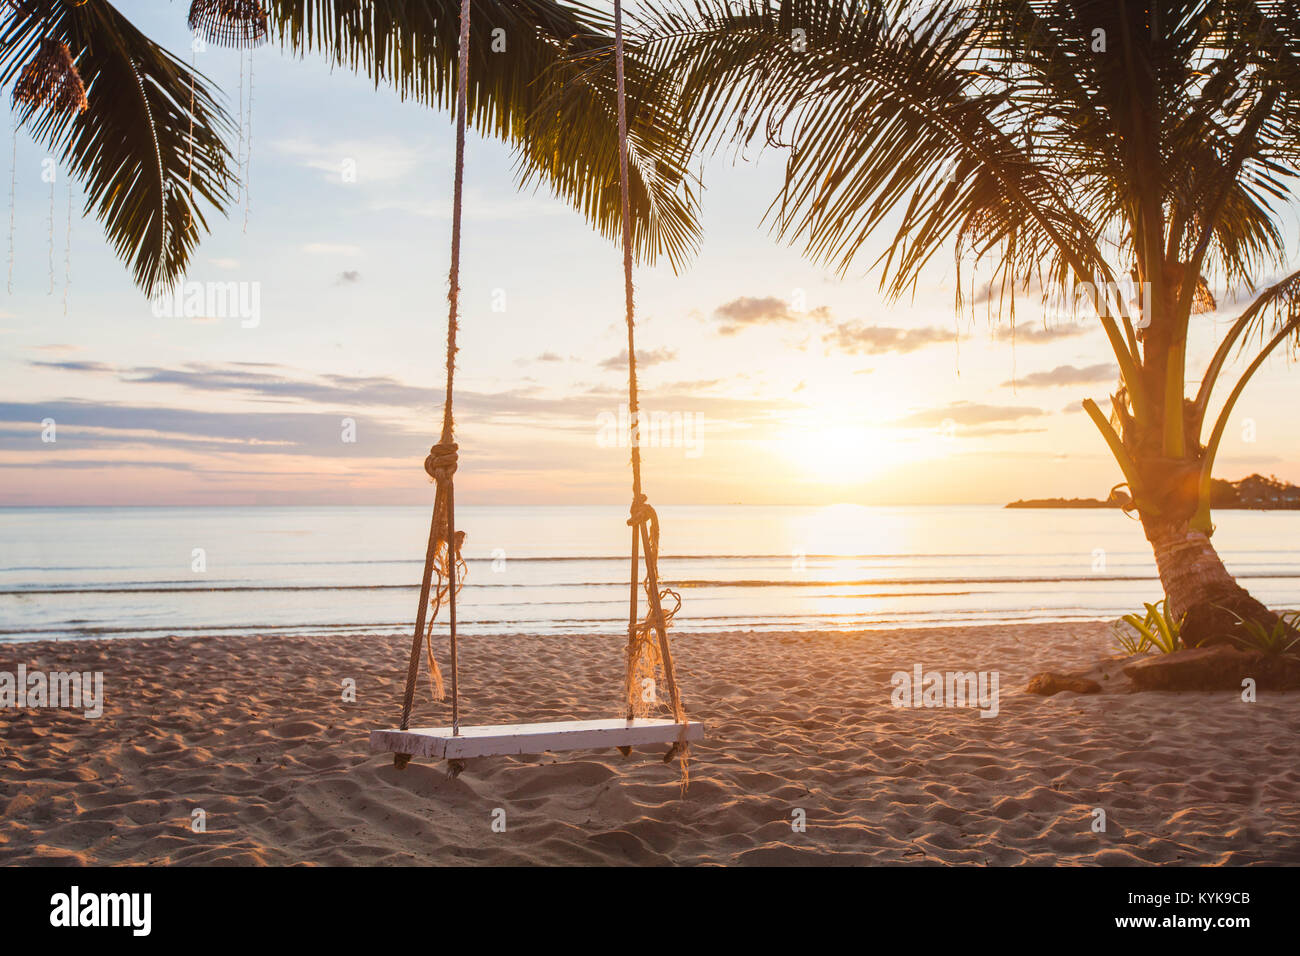 dreamy paradise beach relaxing landscape, tropical swing at sunset Stock Photo